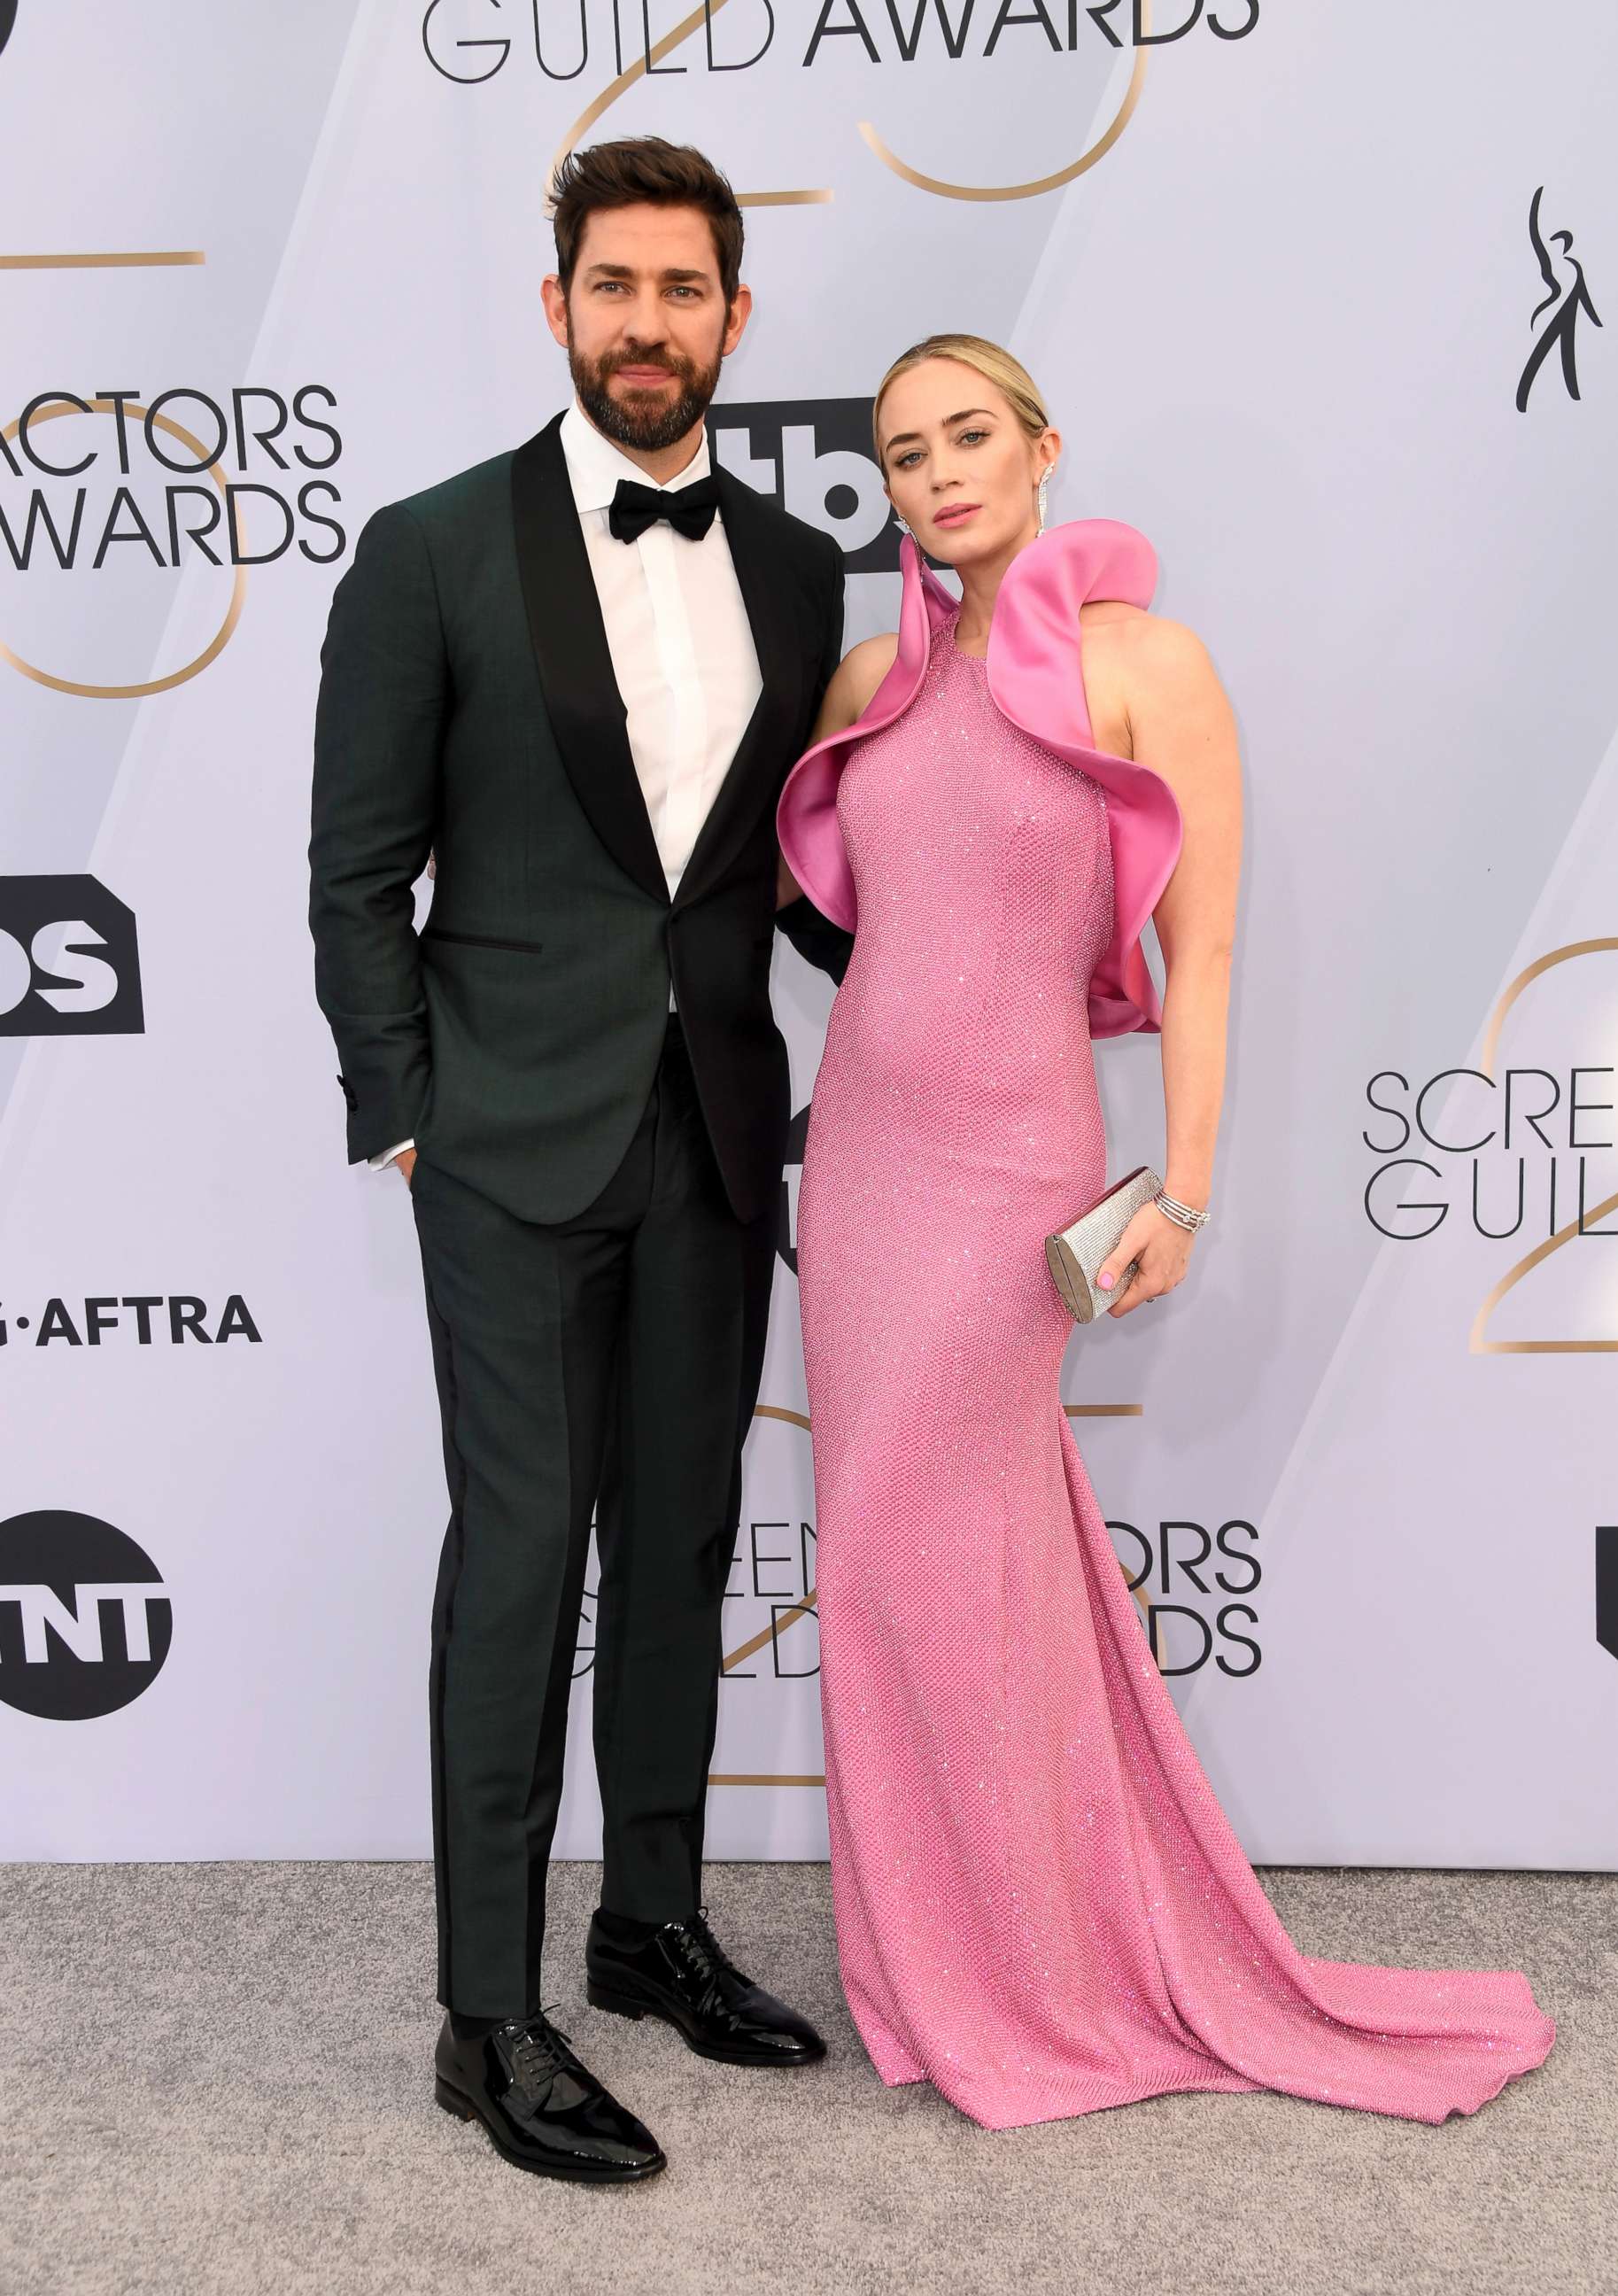 PHOTO: John Krasinski and Emily Blunt attend the 25th annual Screen Actors' Guild awards at the Shrine Auditorium, Jan. 27, 2019, in Los Angeles.